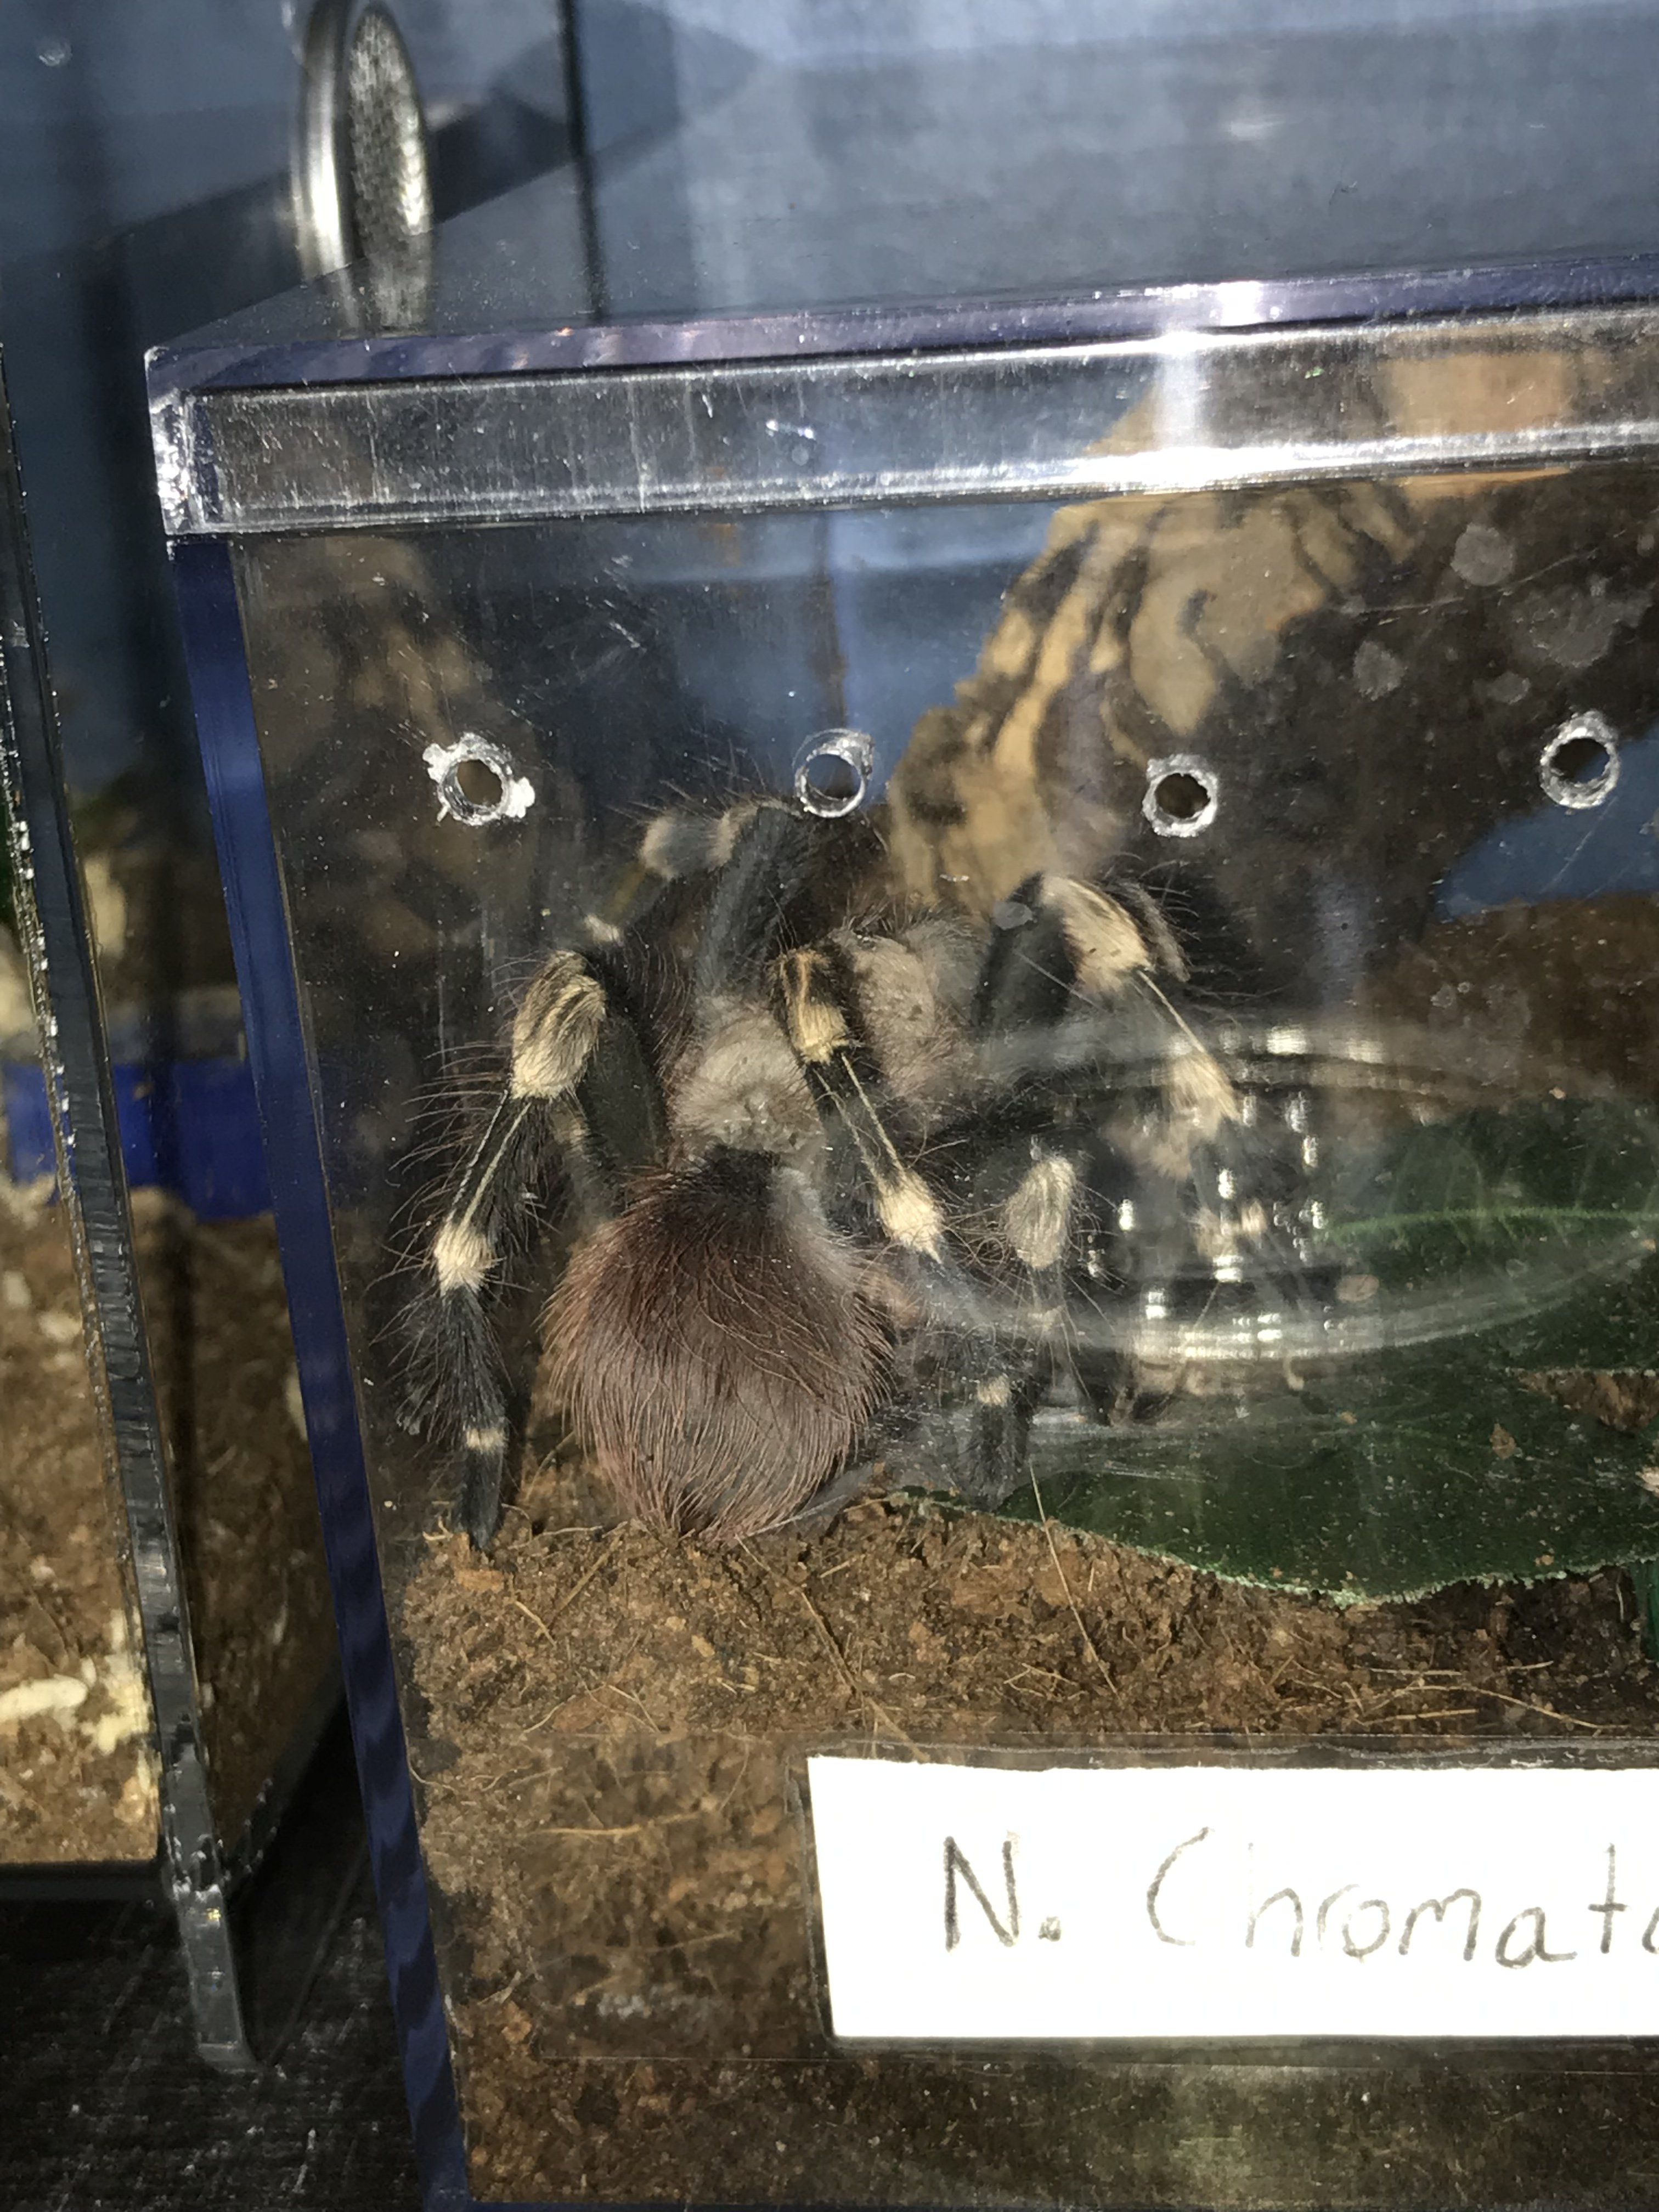 Molted